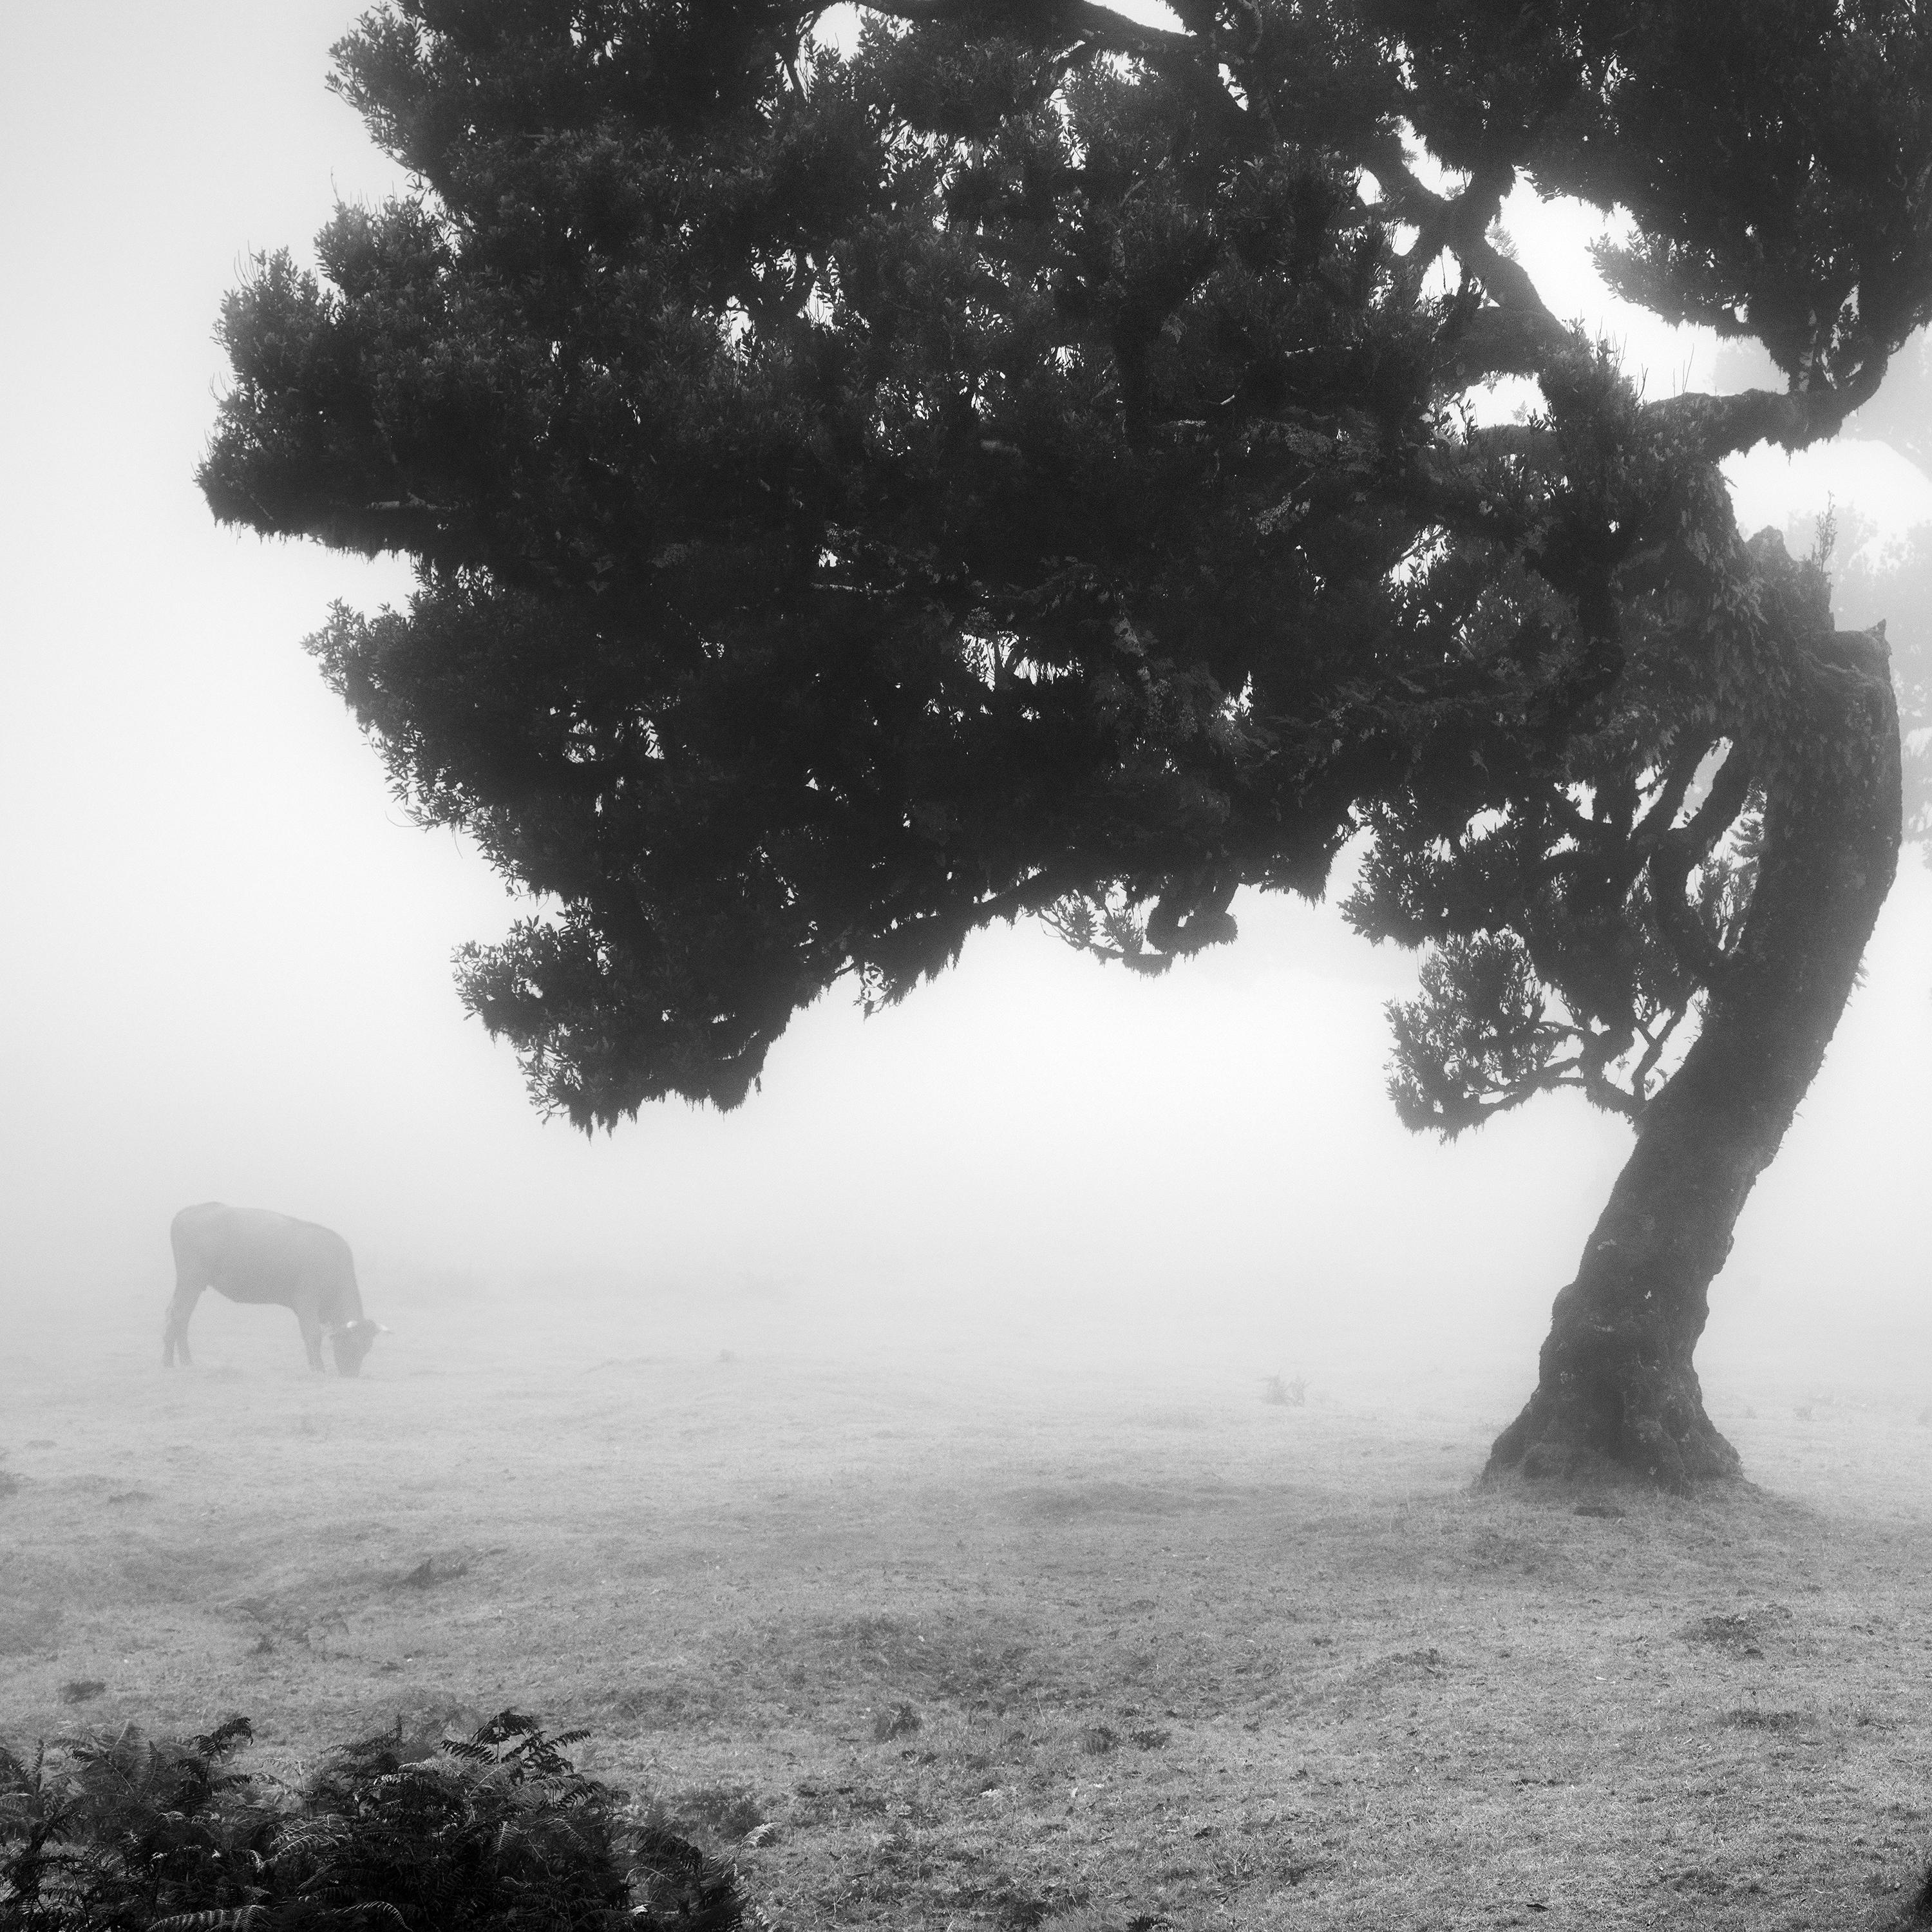 Cows on the foggy Pasture, misty forest, black and white photography, landscape For Sale 5